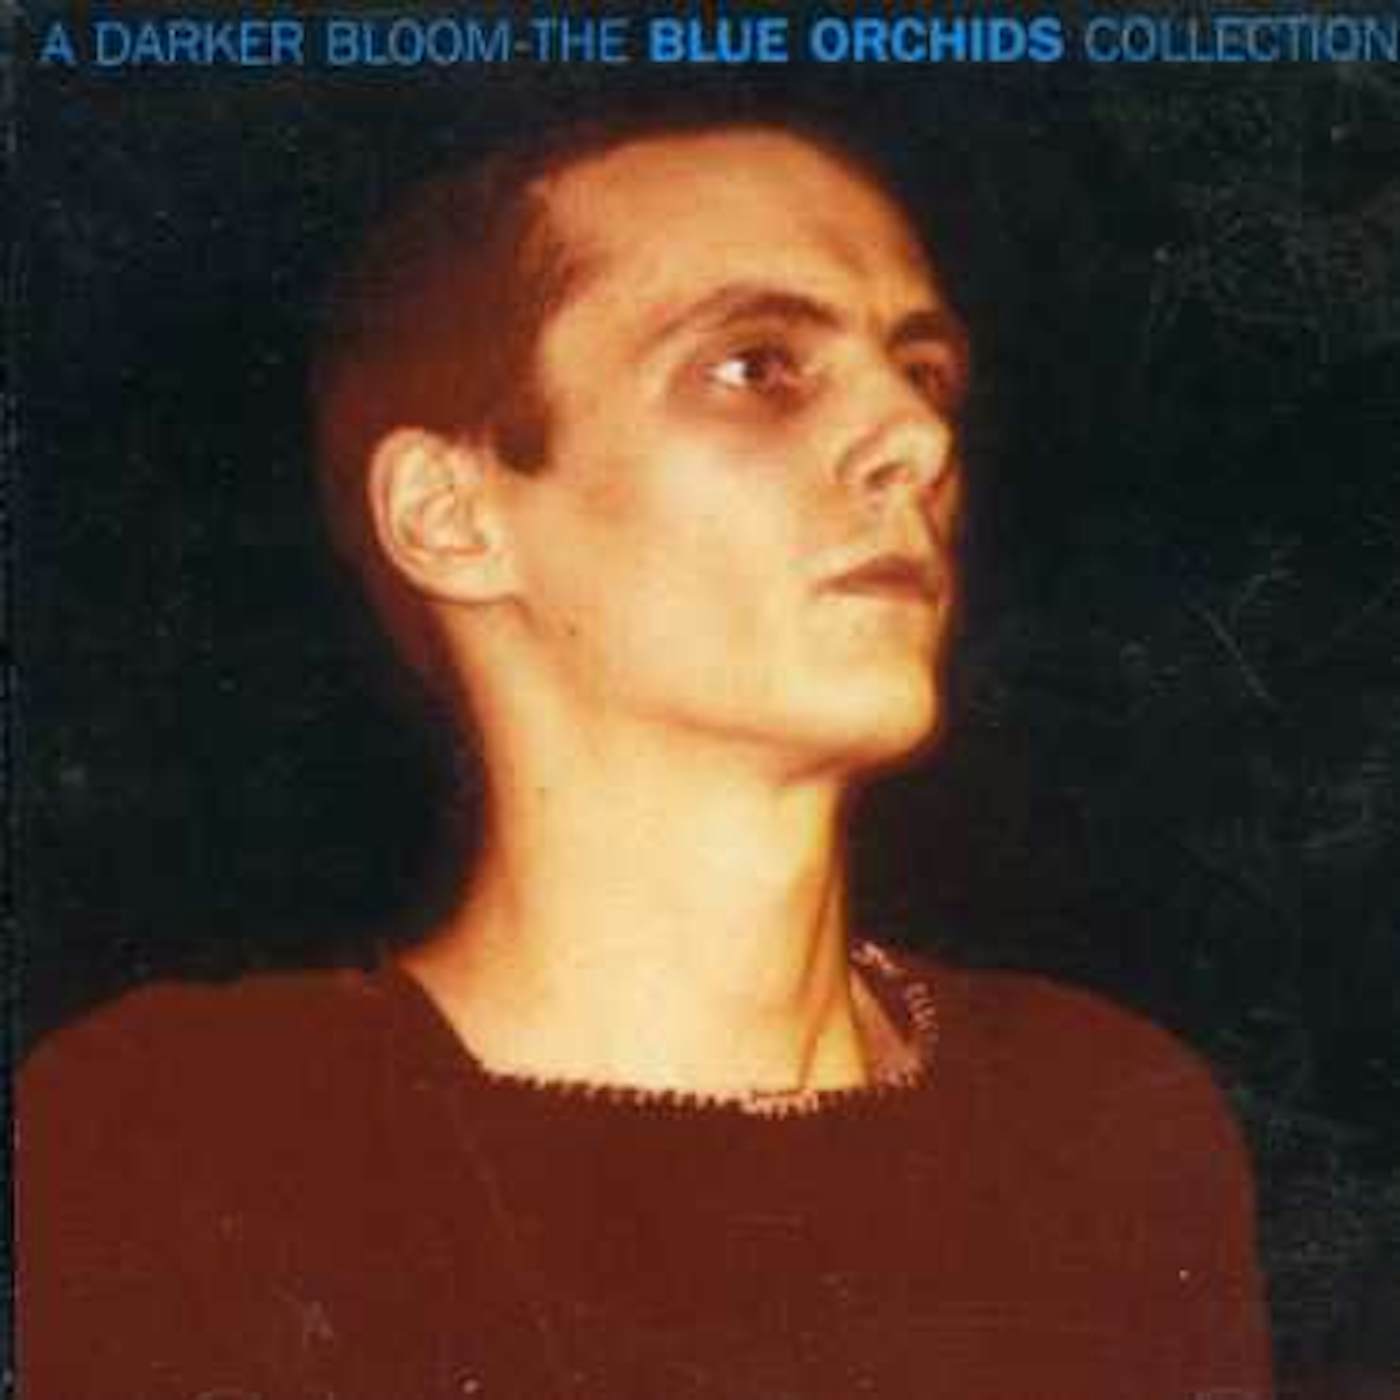 DARKER BLOOM: BLUE ORCHIDS COLLECTION CD